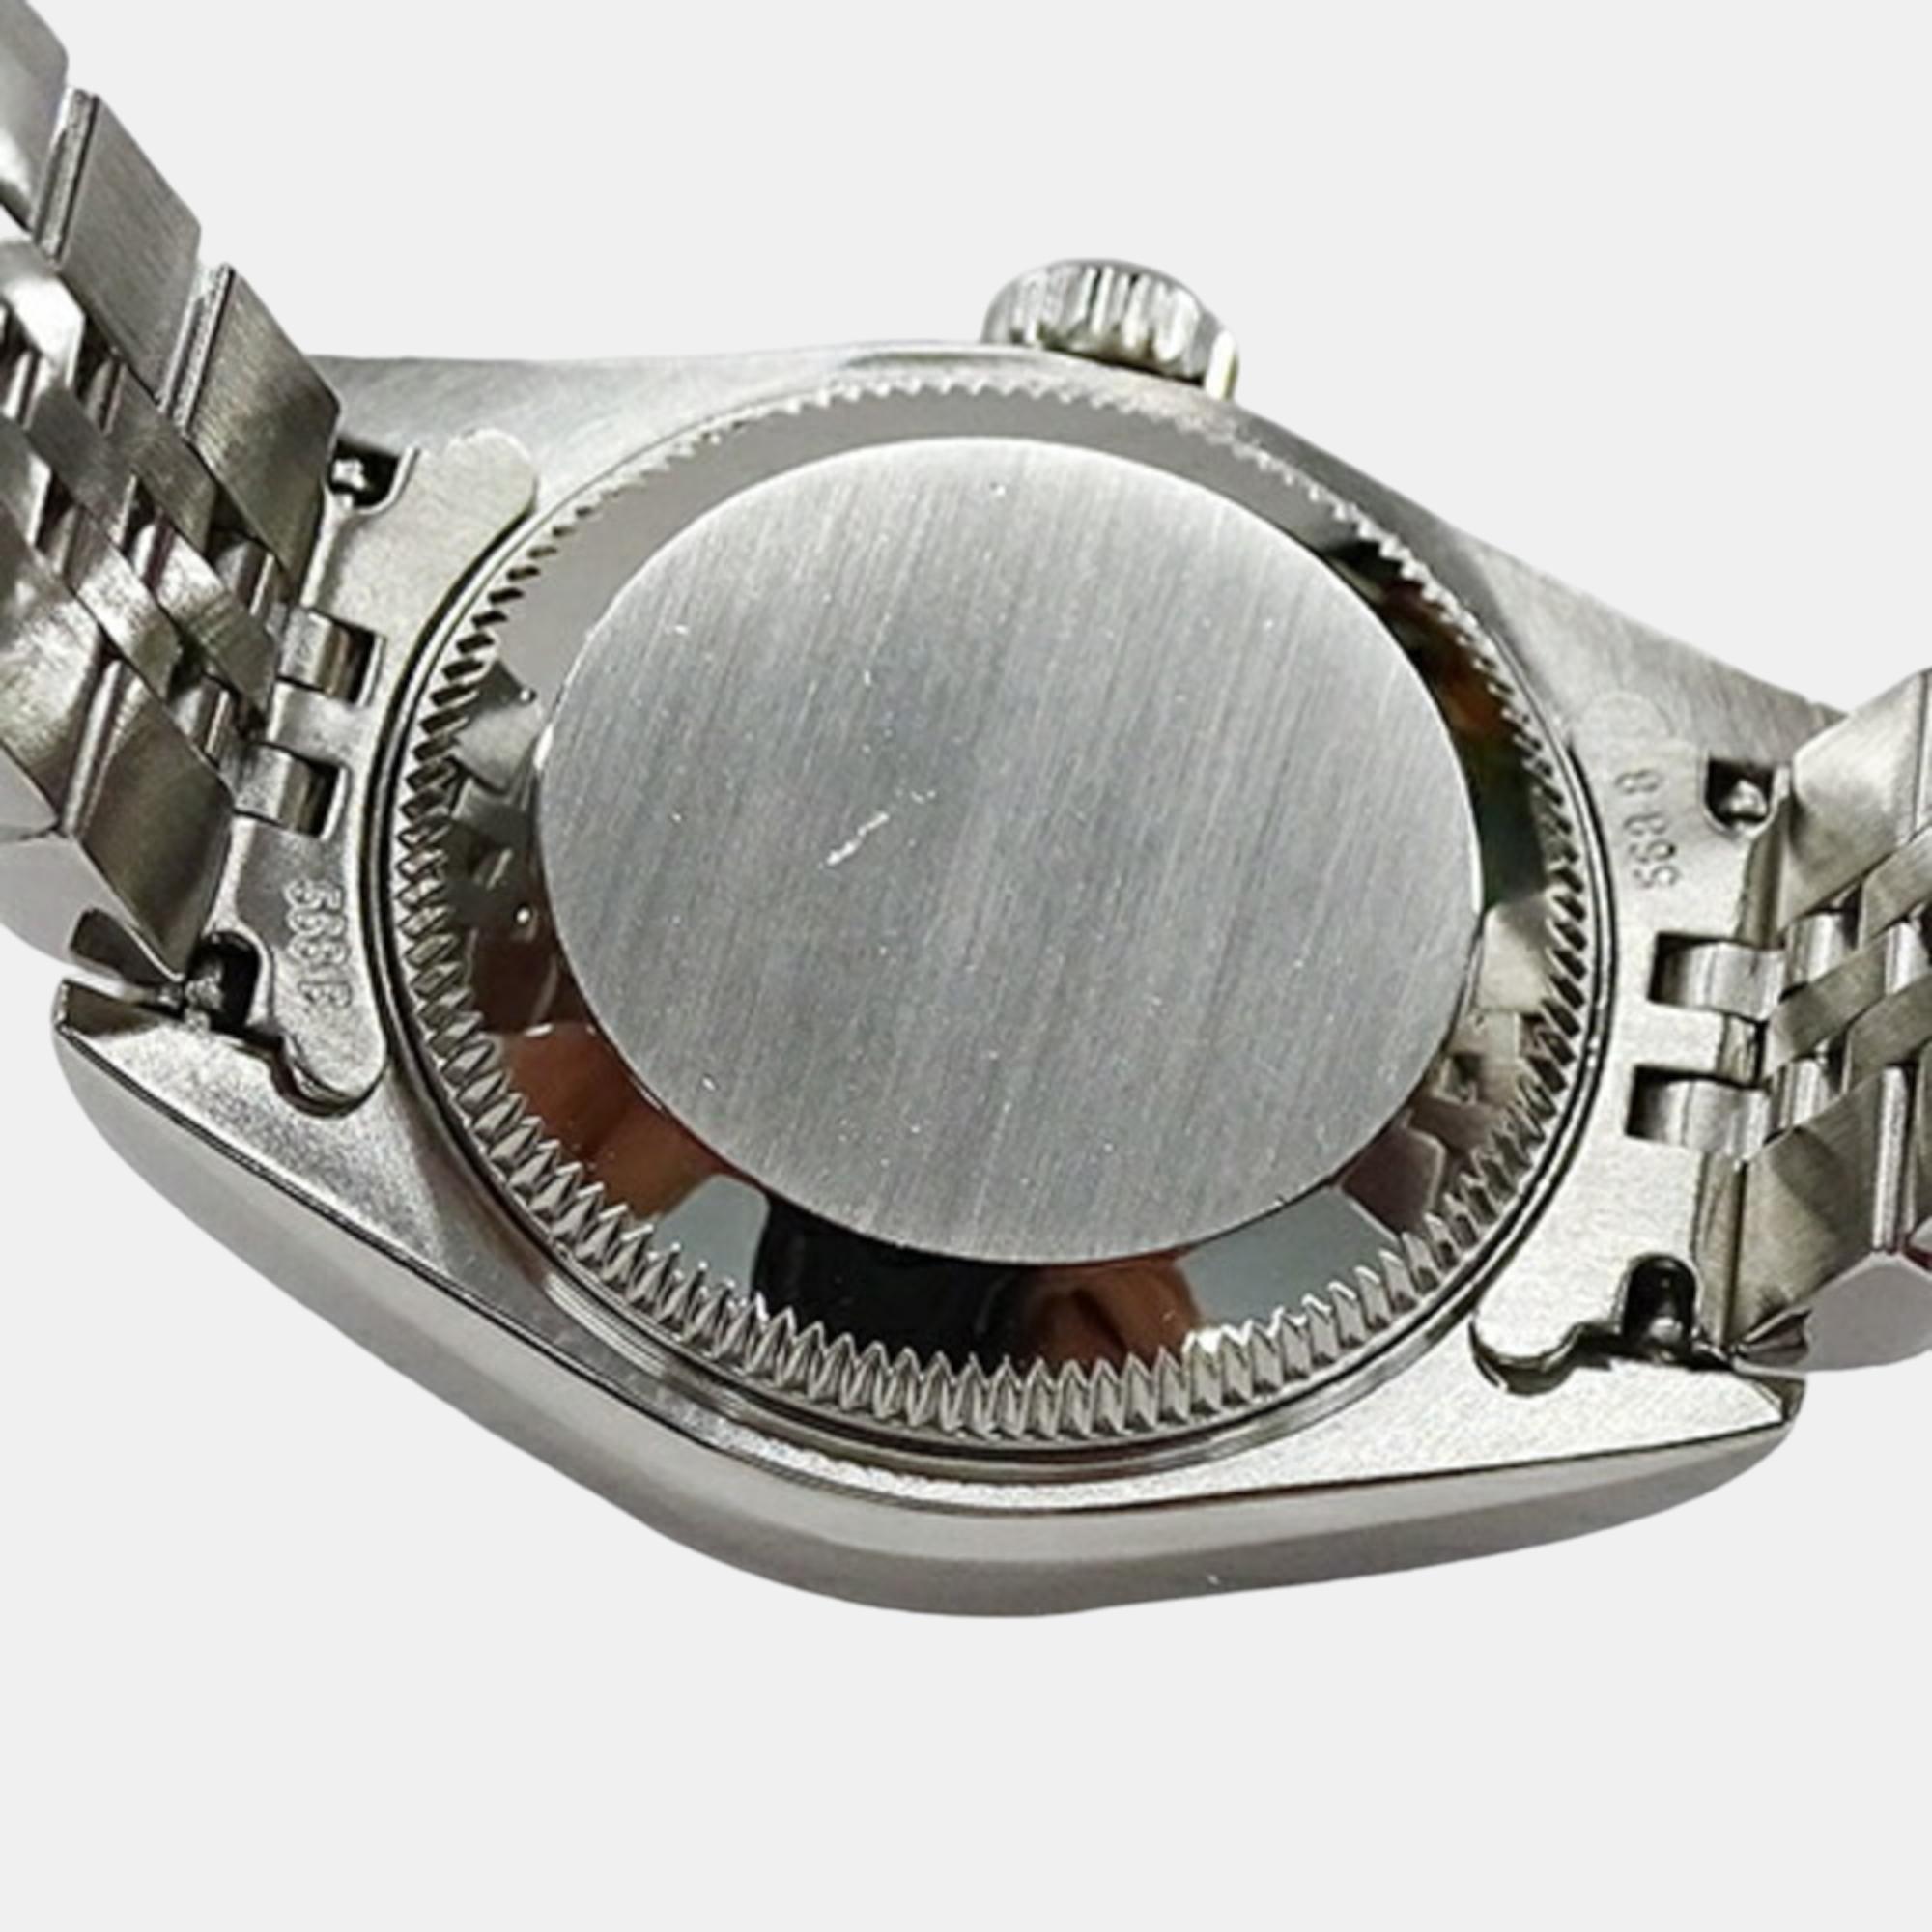 Rolex White 18k White Gold And Stainless Steel Datejust 79174 Automatic Women's Wristwatch 26 Mm